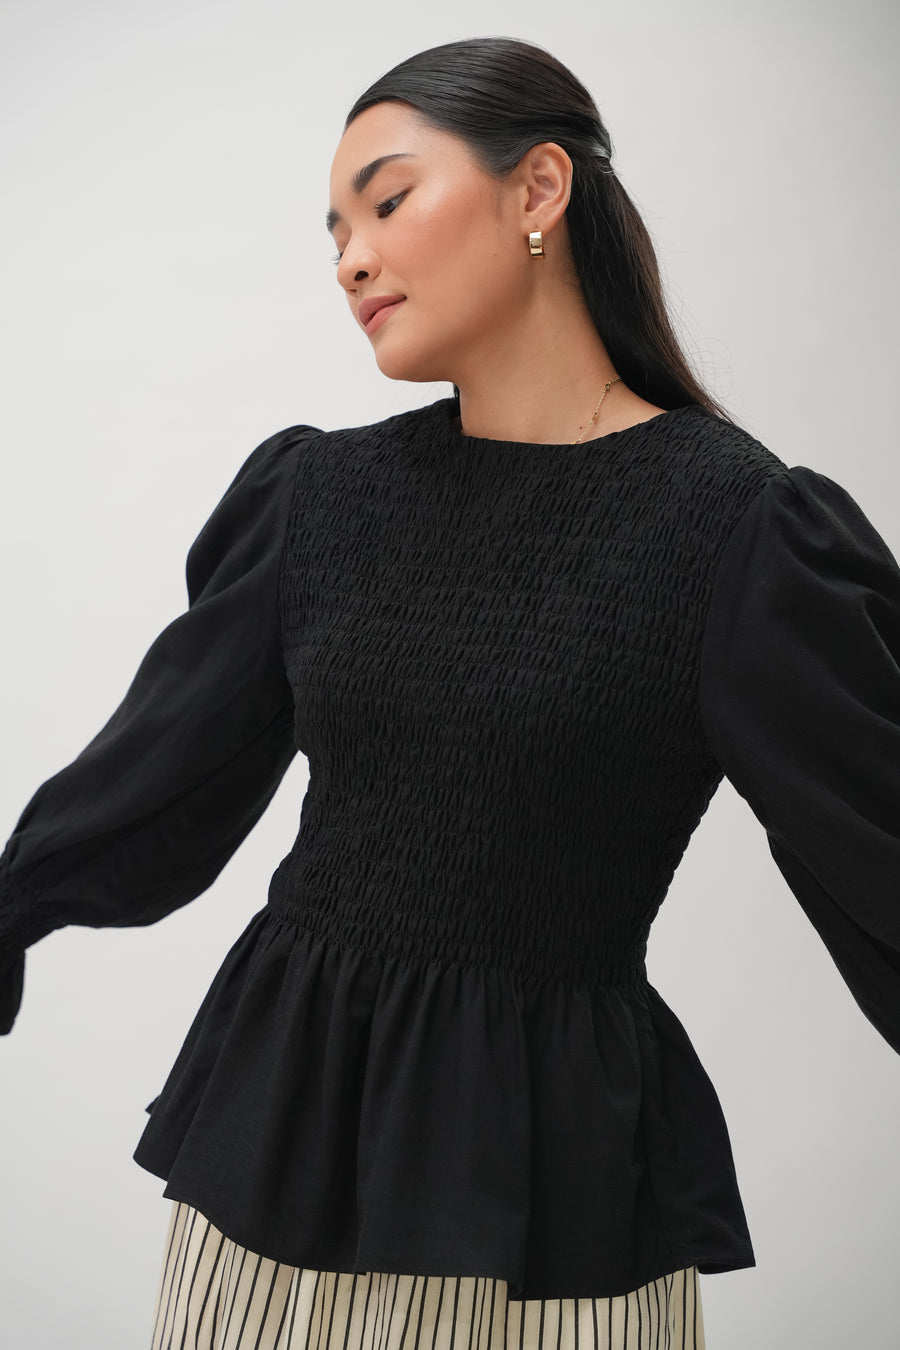 Glow Up Blouse in Black